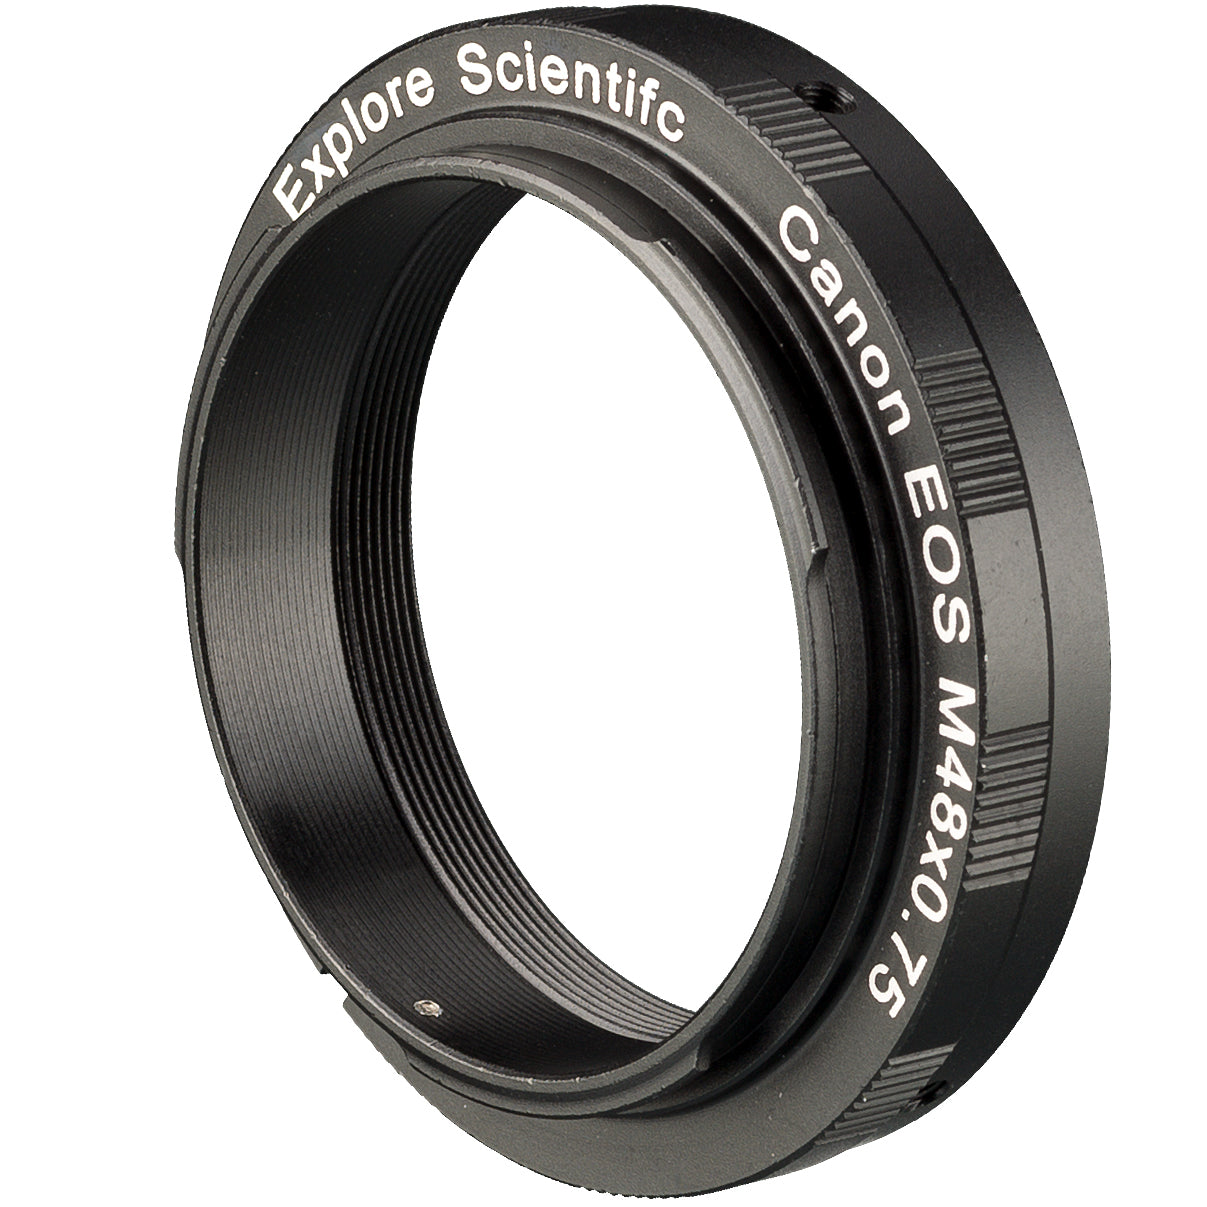 DSLR Camera T-Ring Adapter (M48) - Canon EOS